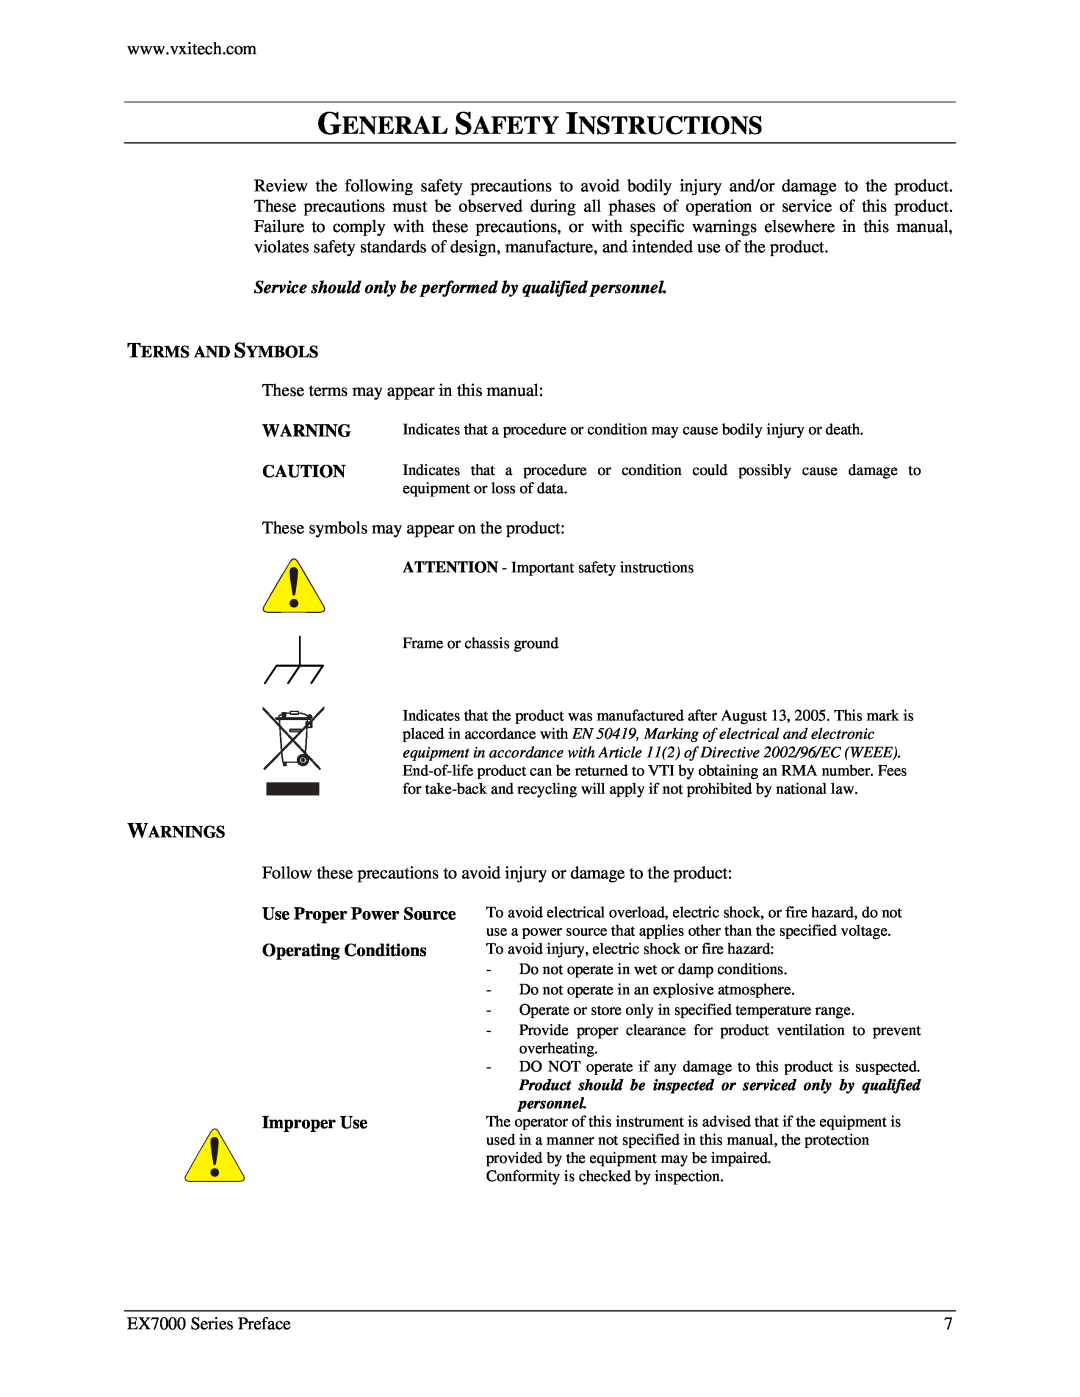 VXI EX7000 General Safety Instructions, Service should only be performed by qualified personnel, Terms And Symbols 